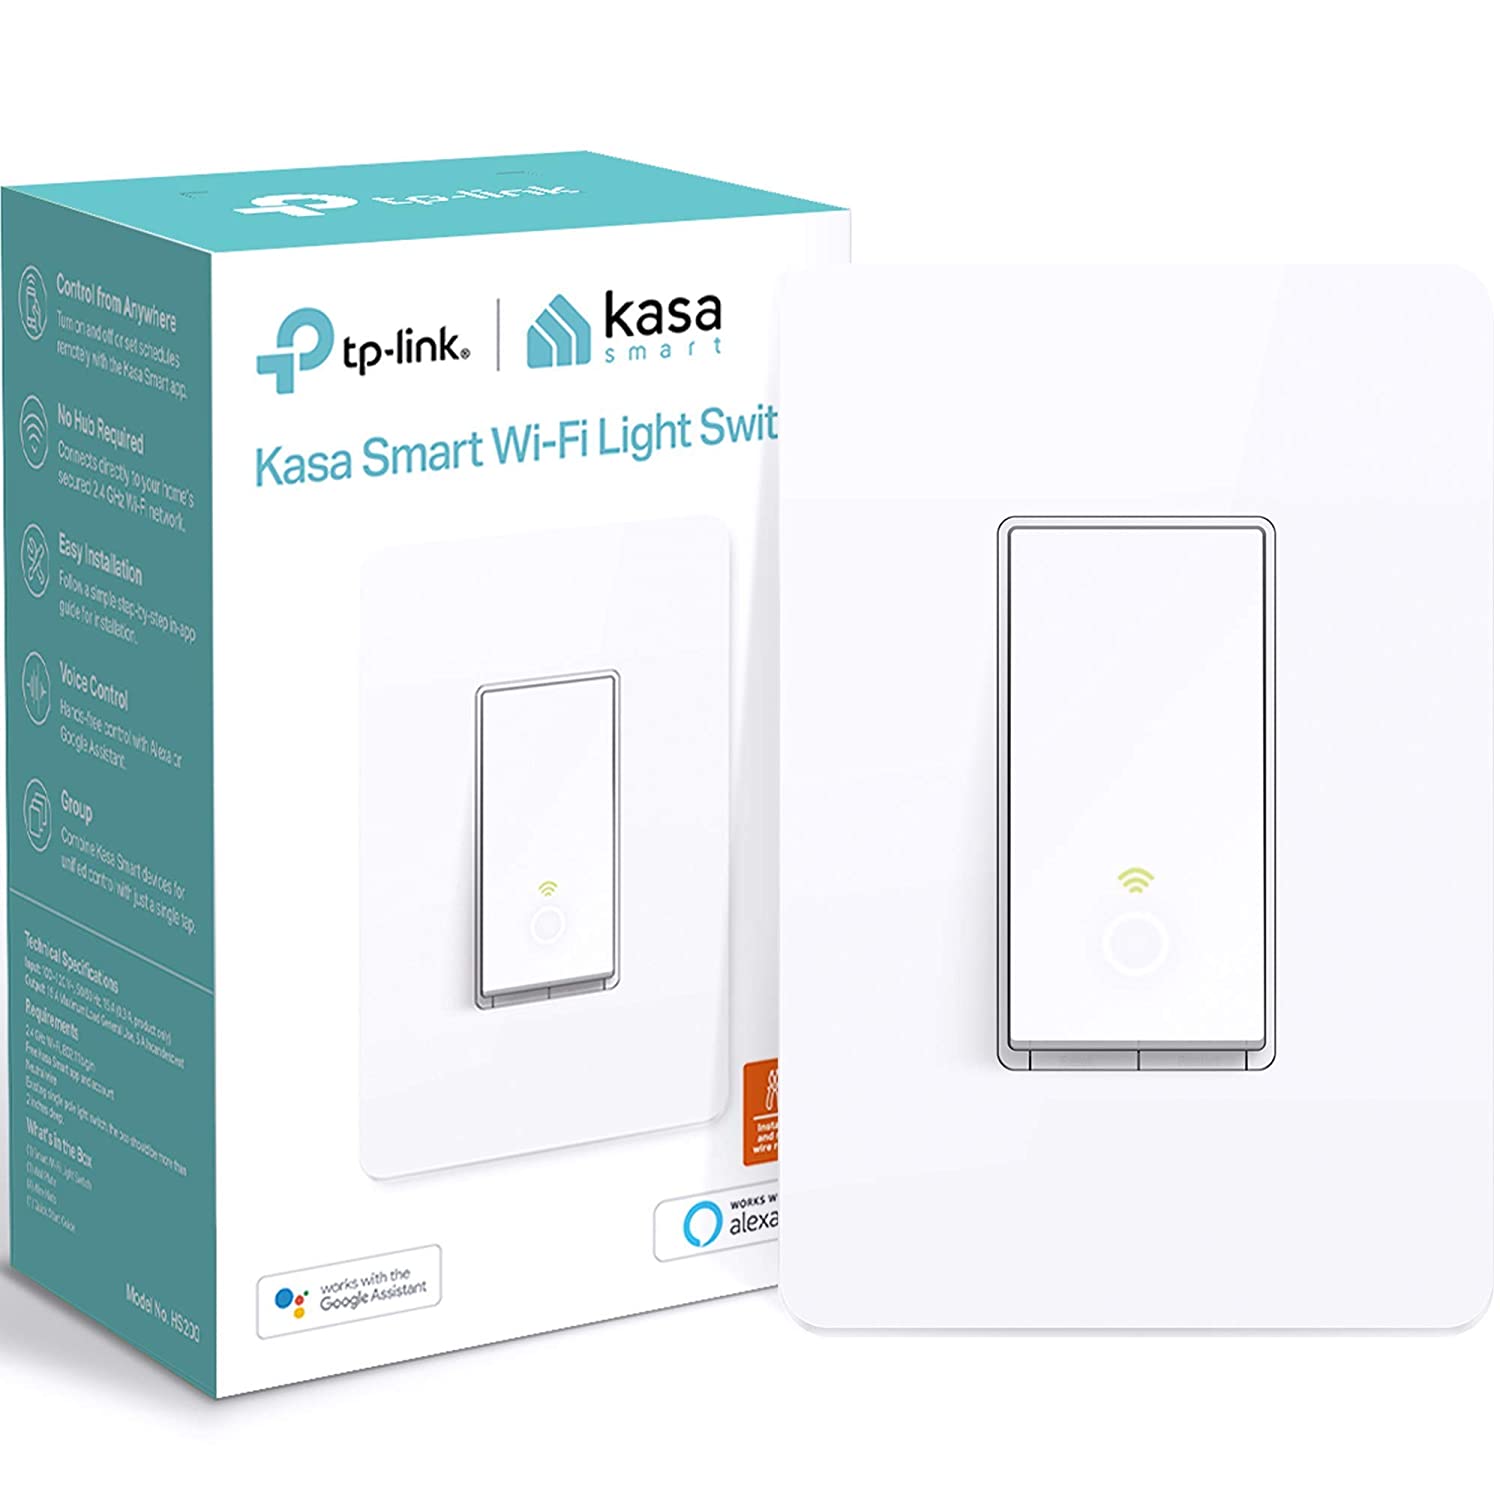 TP-Link Kasa Wi-Fi Smart Light Switch HS200 $14.95, HS210 3-Way Light Switch $16.98 & More   + Free Shipping w/ Prime or on $25+